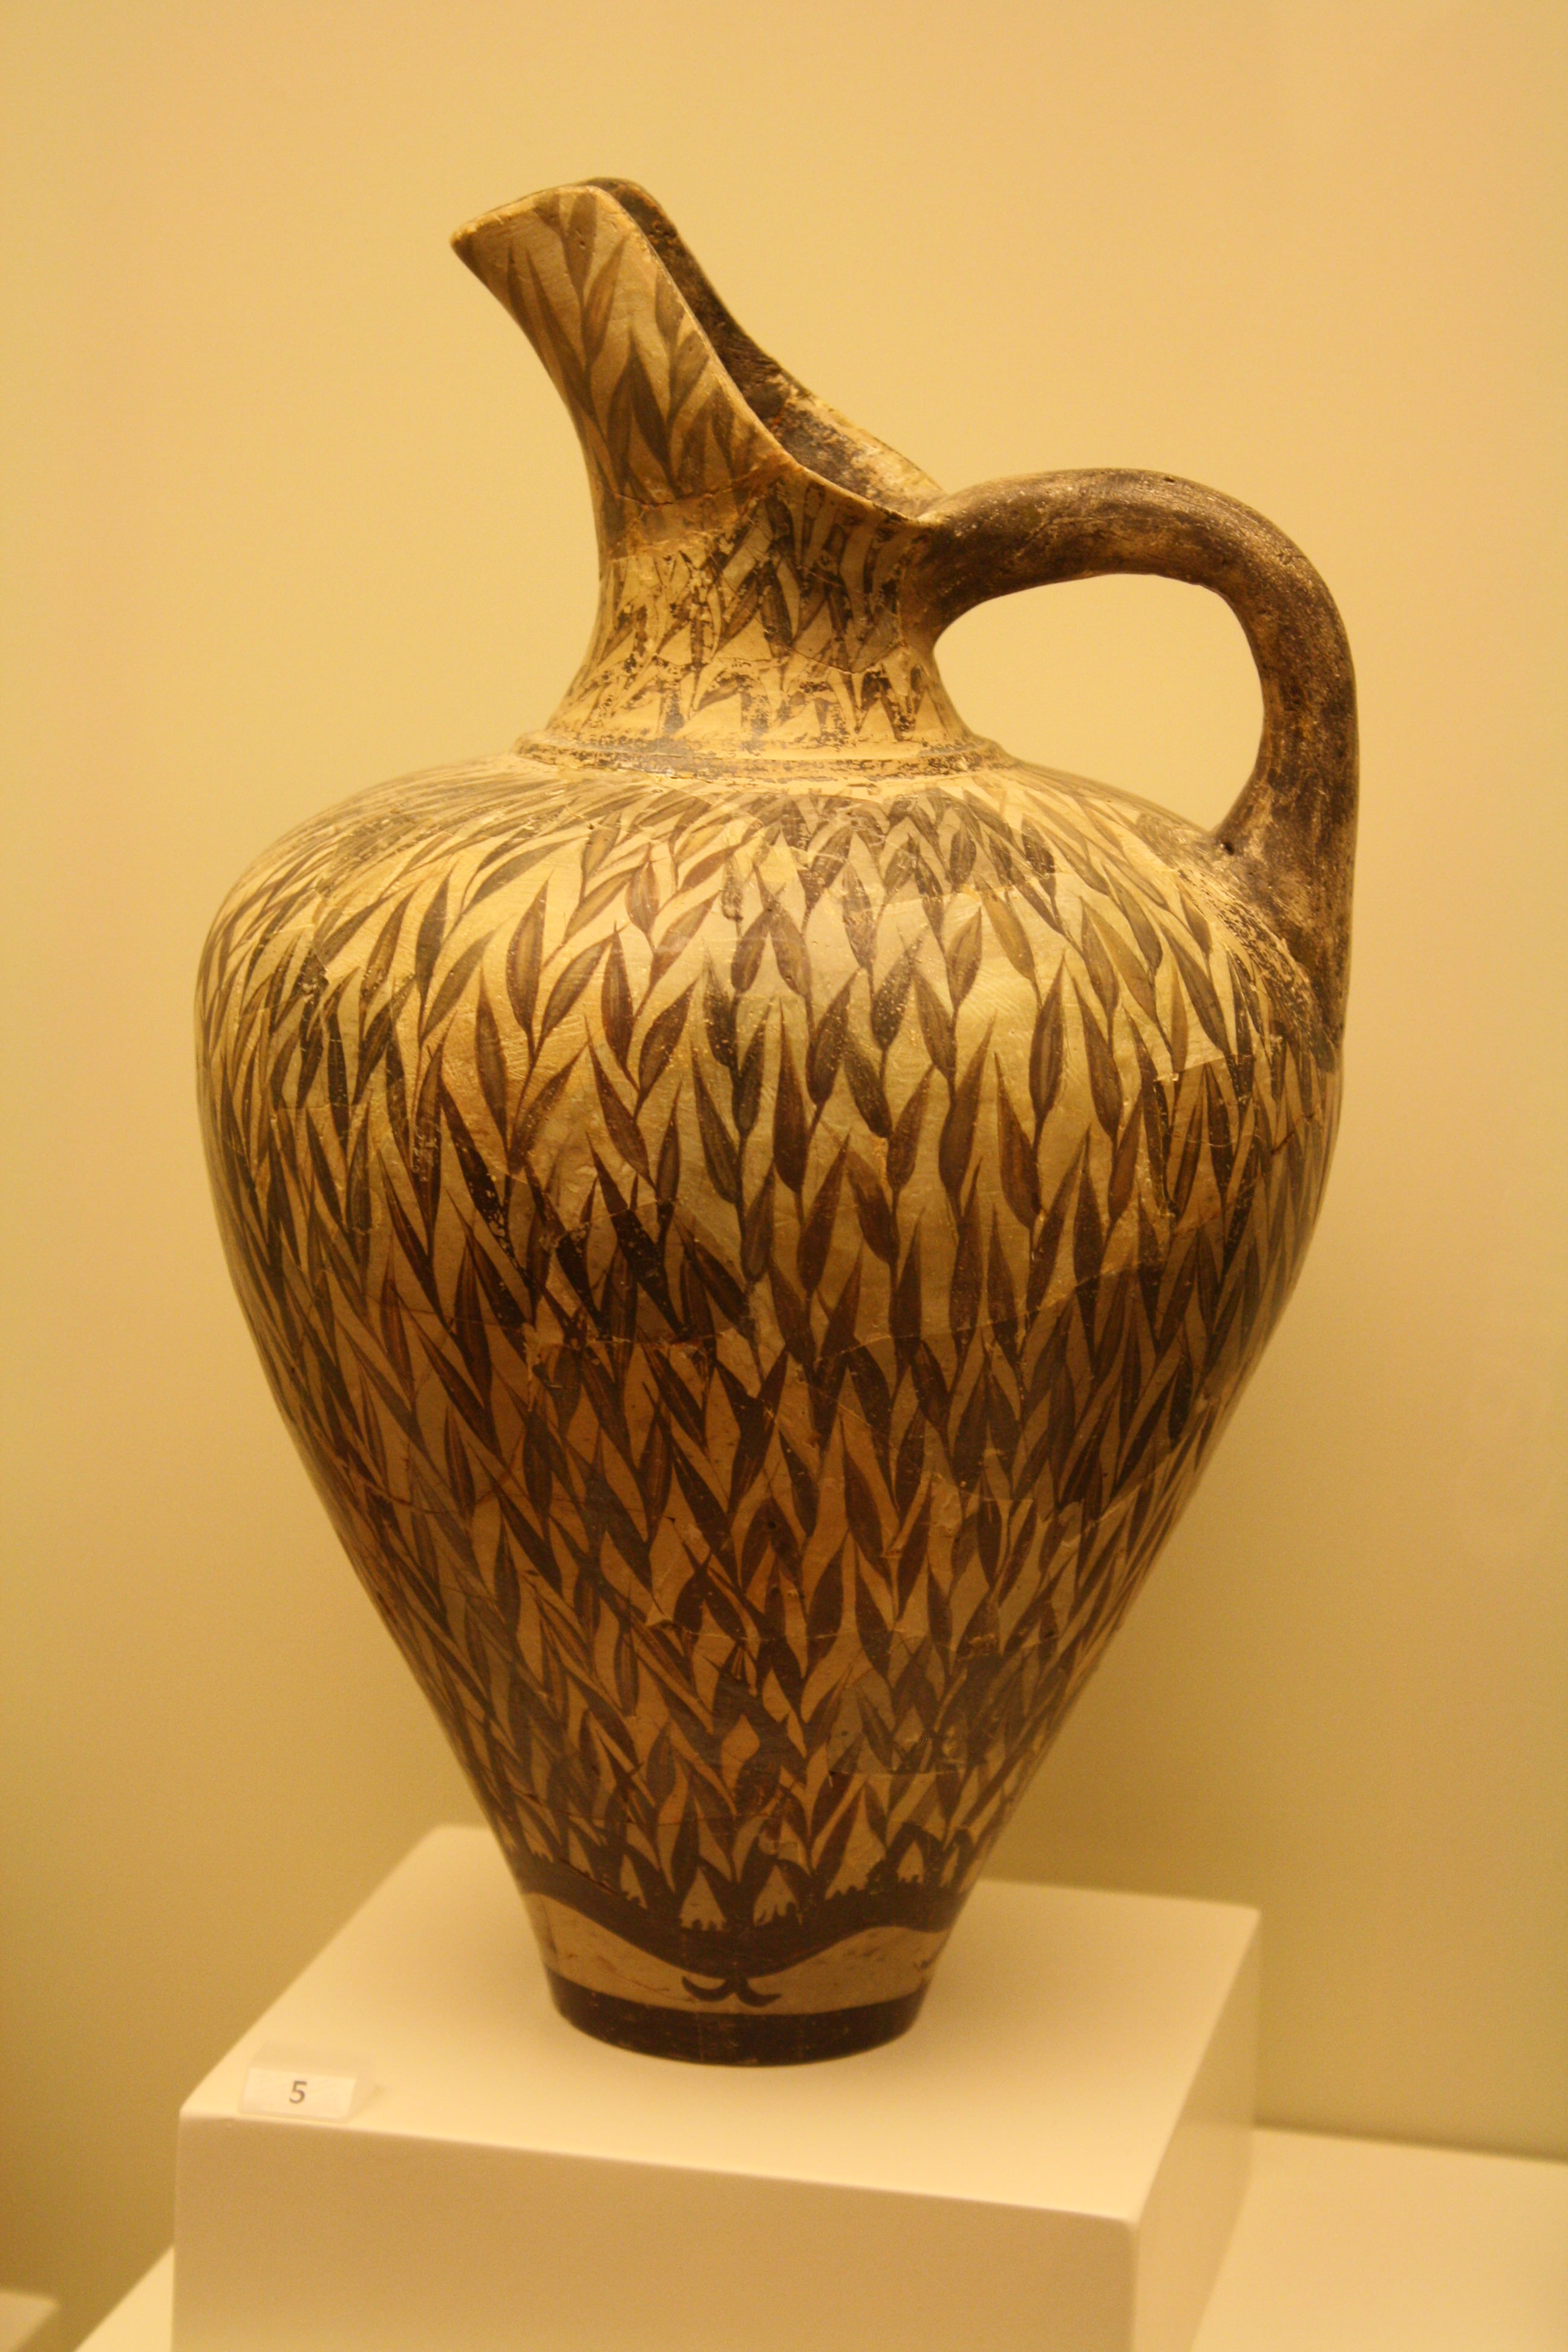 All about Minoan Pottery and Ceramics